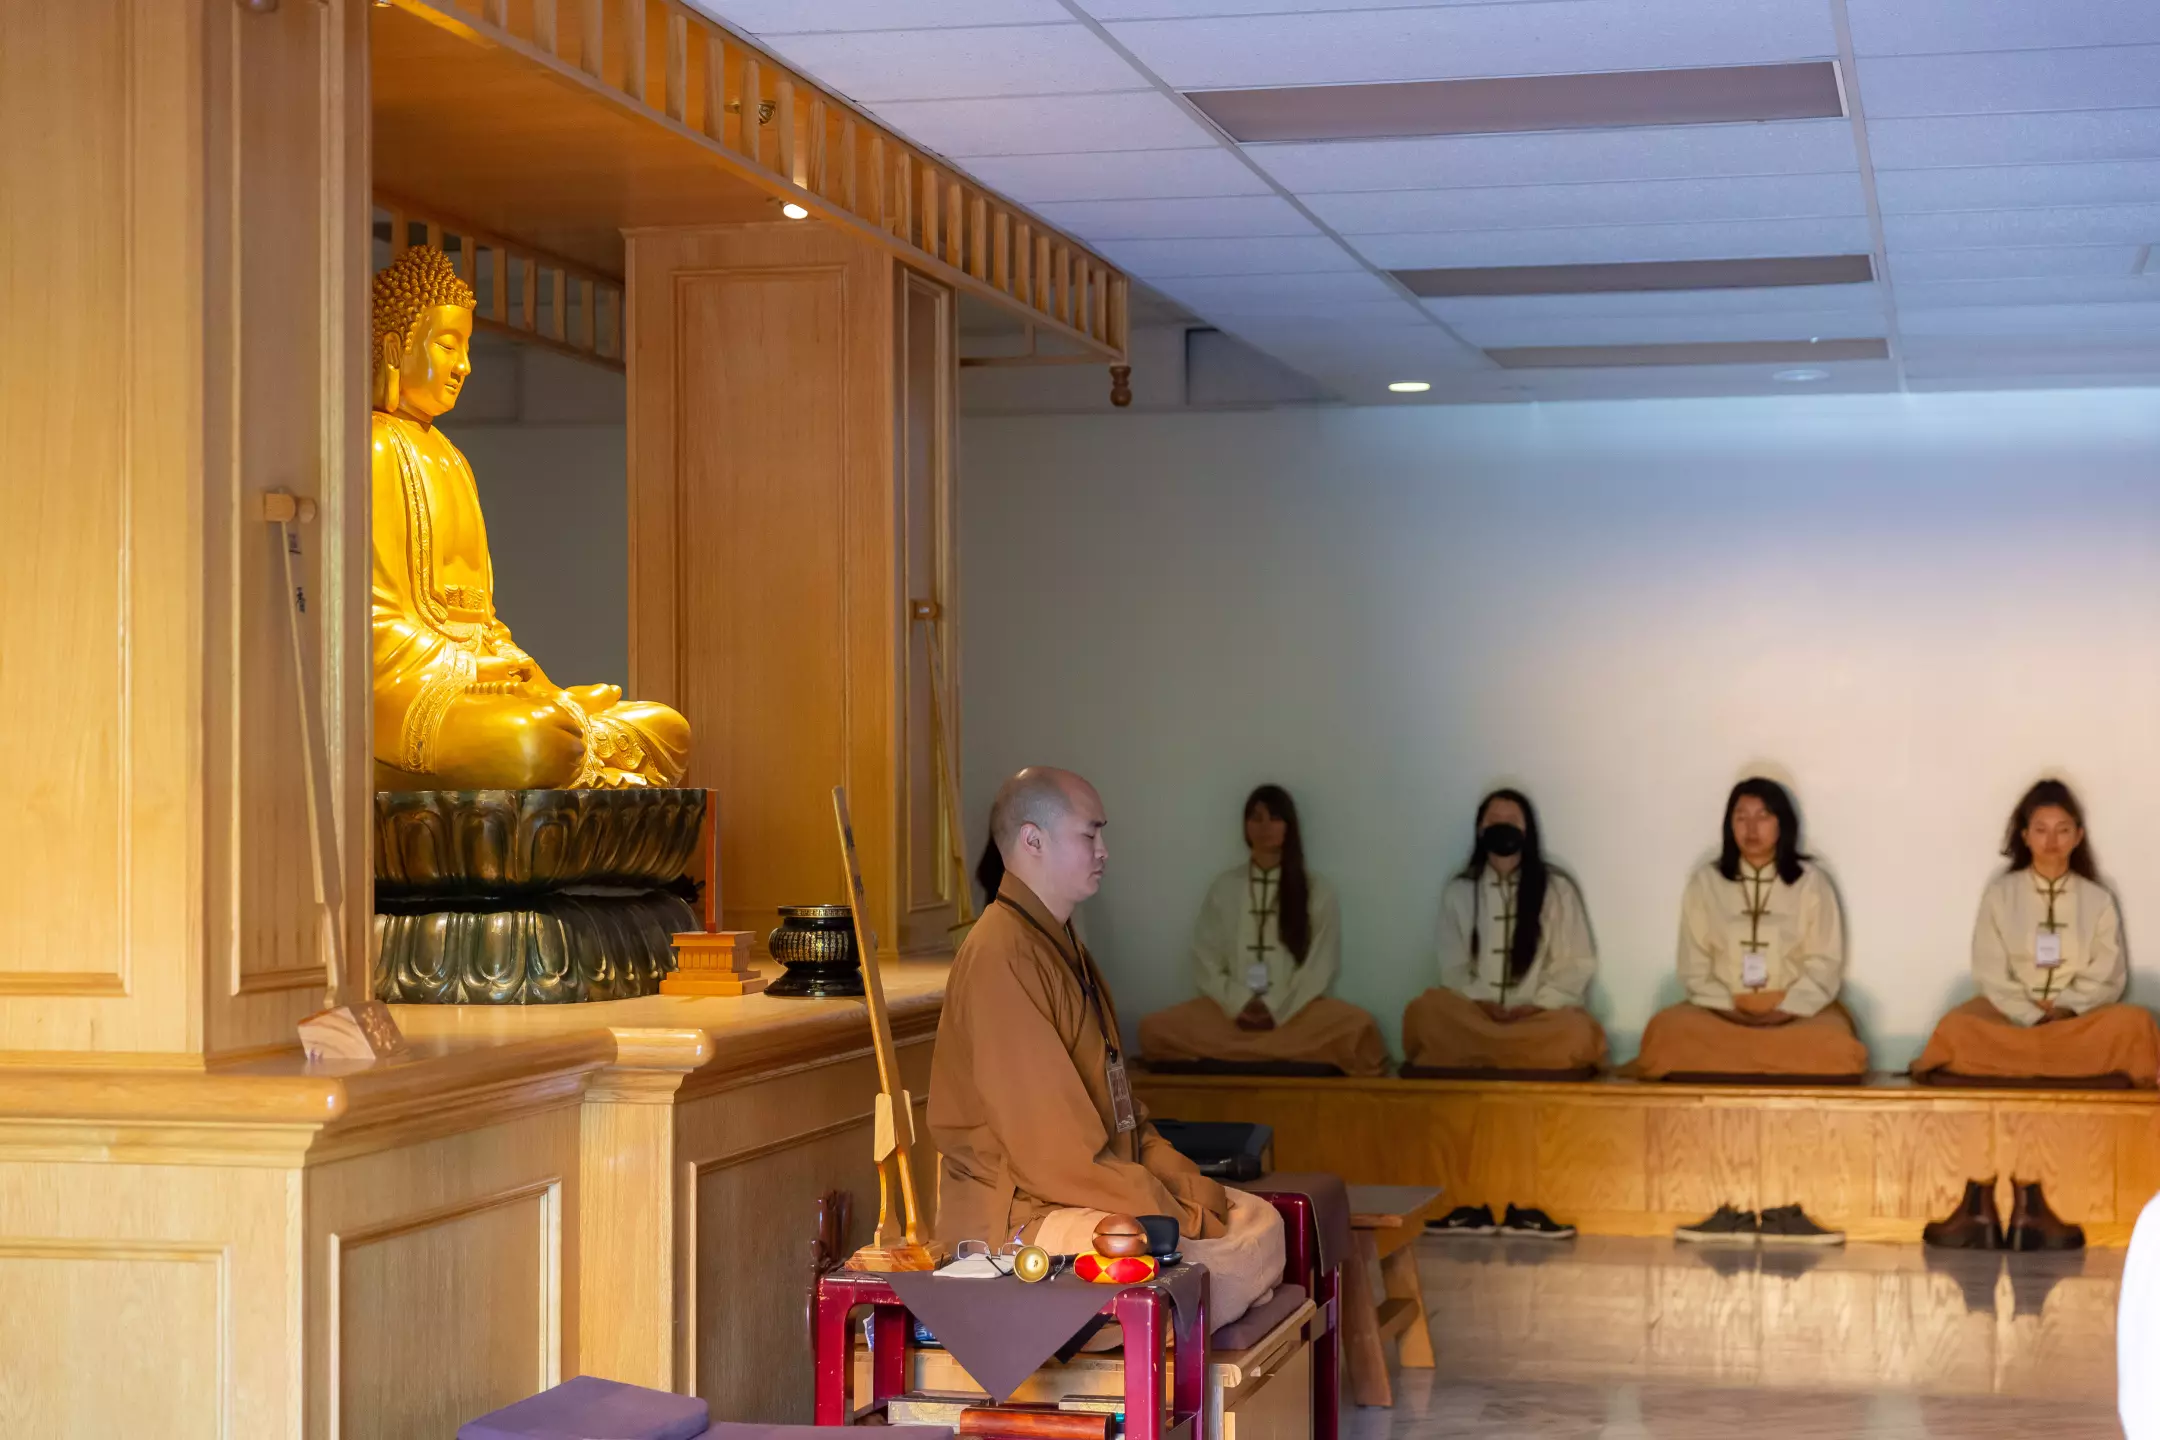 Venerable Hui Cheng, a resident monastic at Fo Guang Shan Hsi Lai Temple in Hacienda Heights, leads a sitting meditation session in the meditation hall. Select to go to the story.